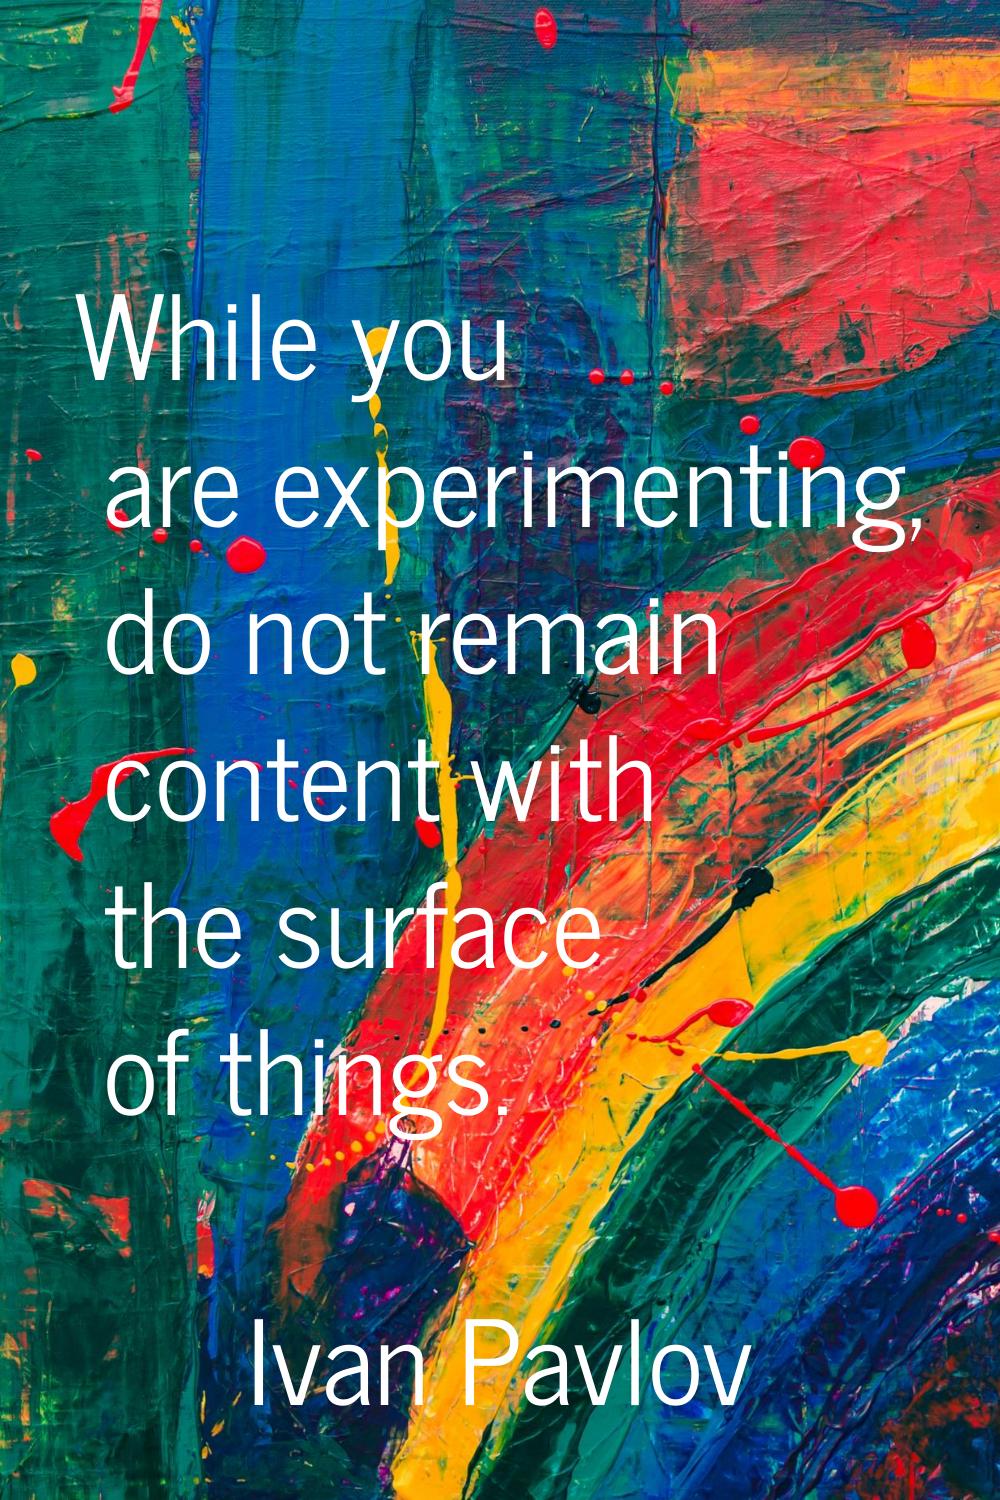 While you are experimenting, do not remain content with the surface of things.